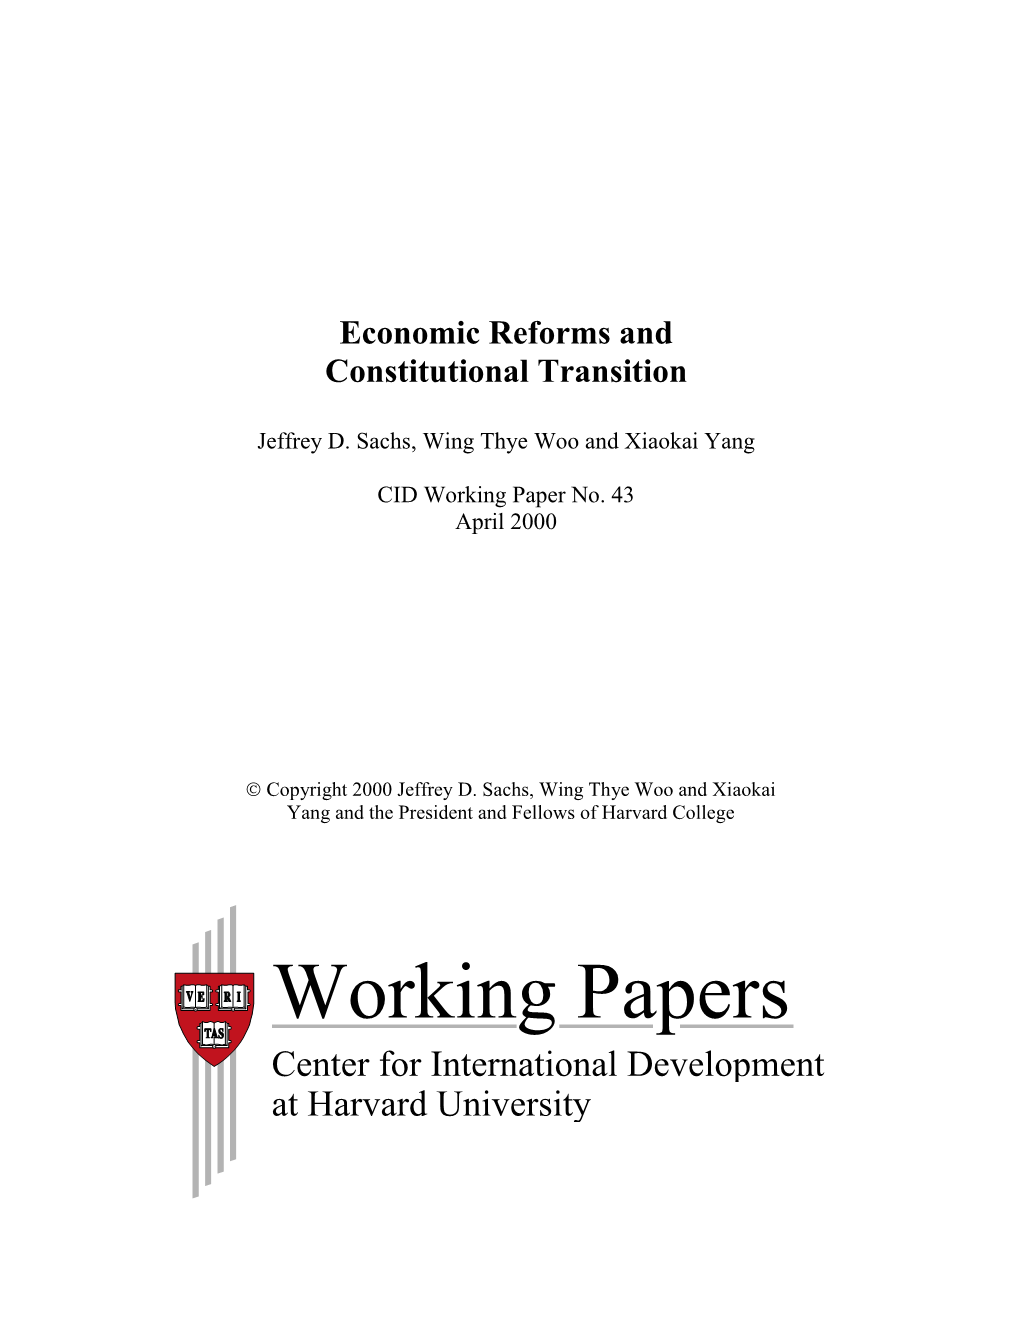 CID Working Paper No. 043 :: Economic Reforms and Constitutional